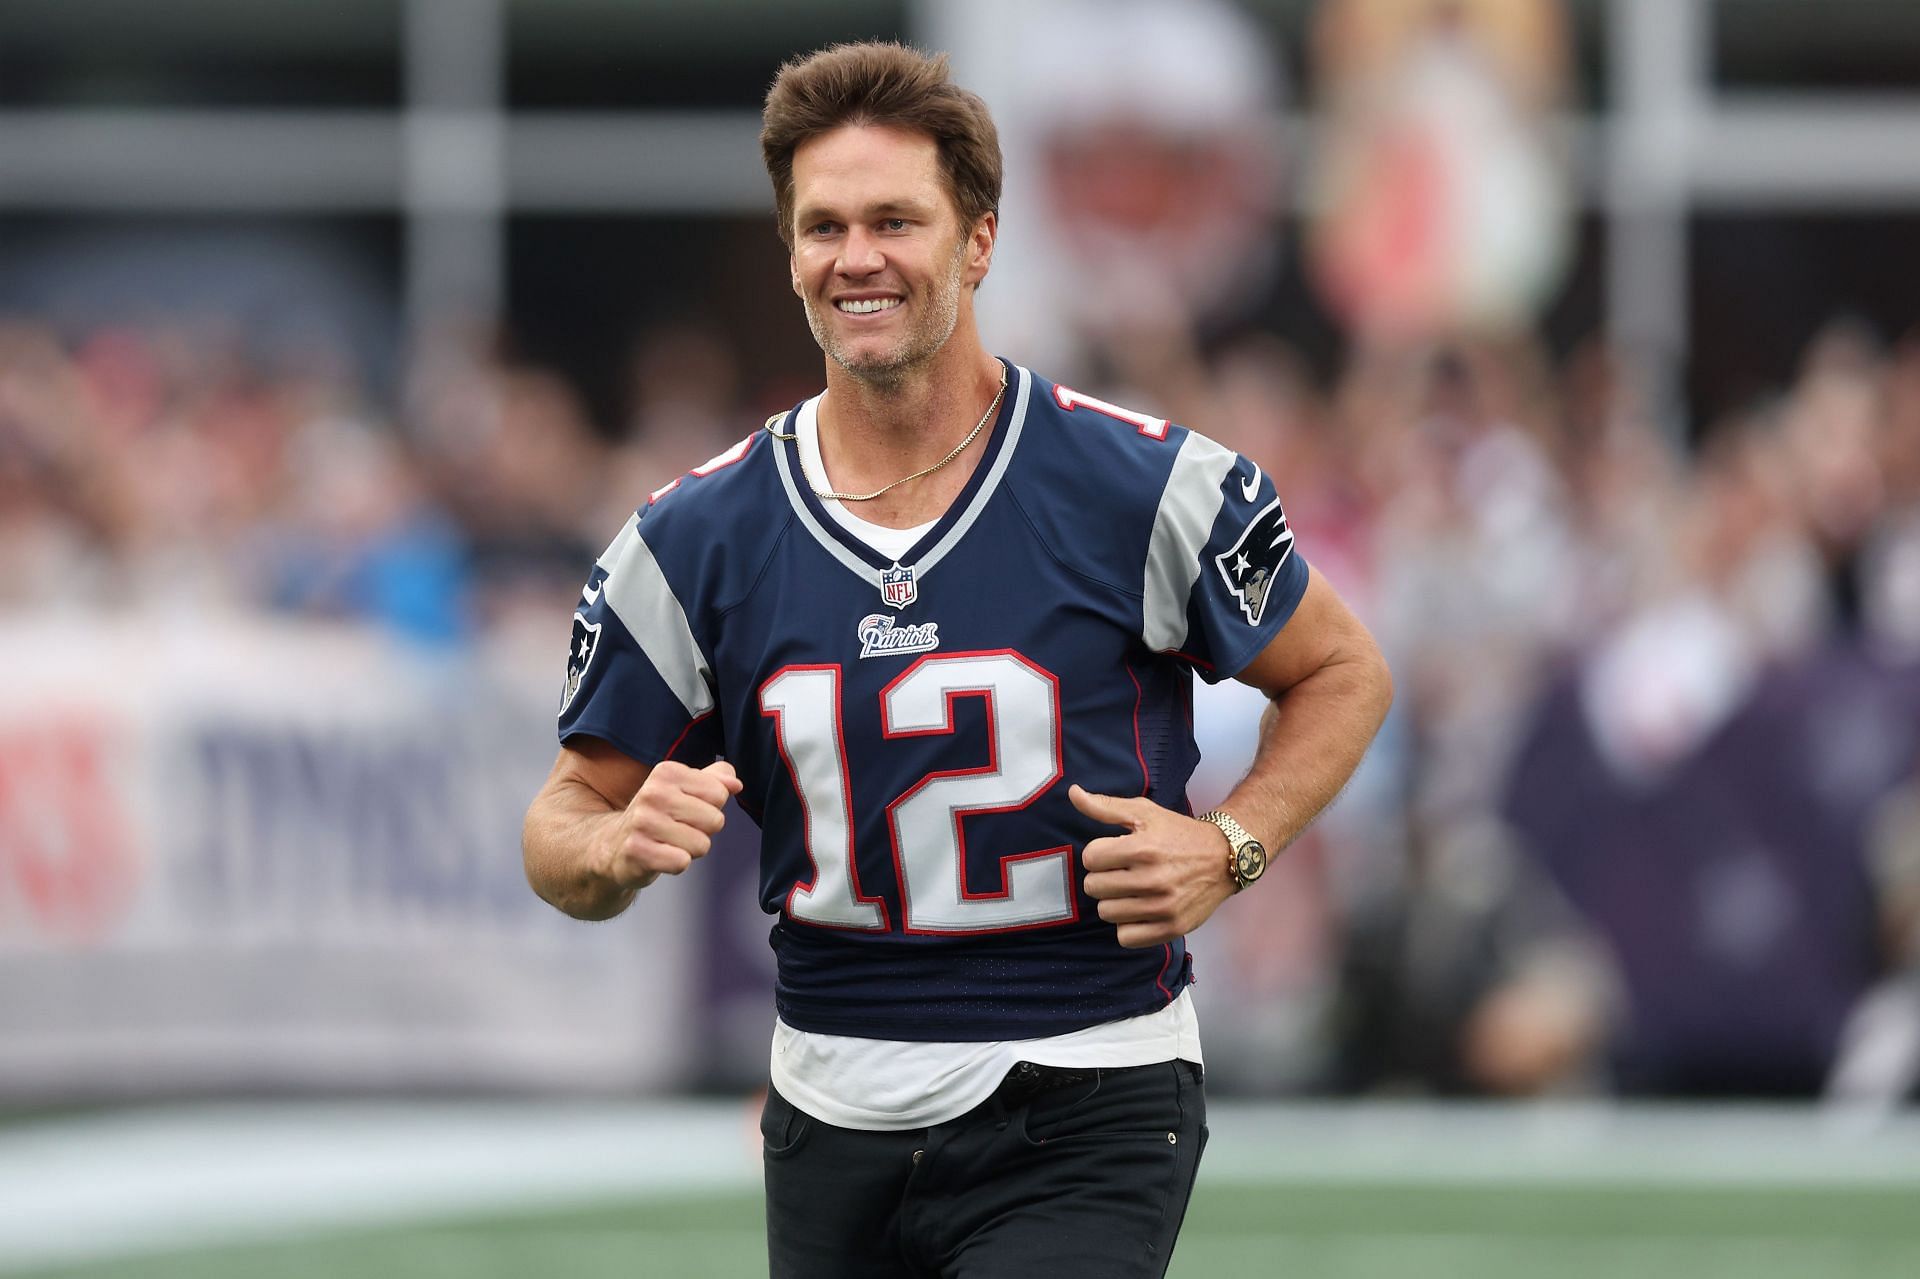 The Patriot Way': What to Know About the Tom Brady Limited Series